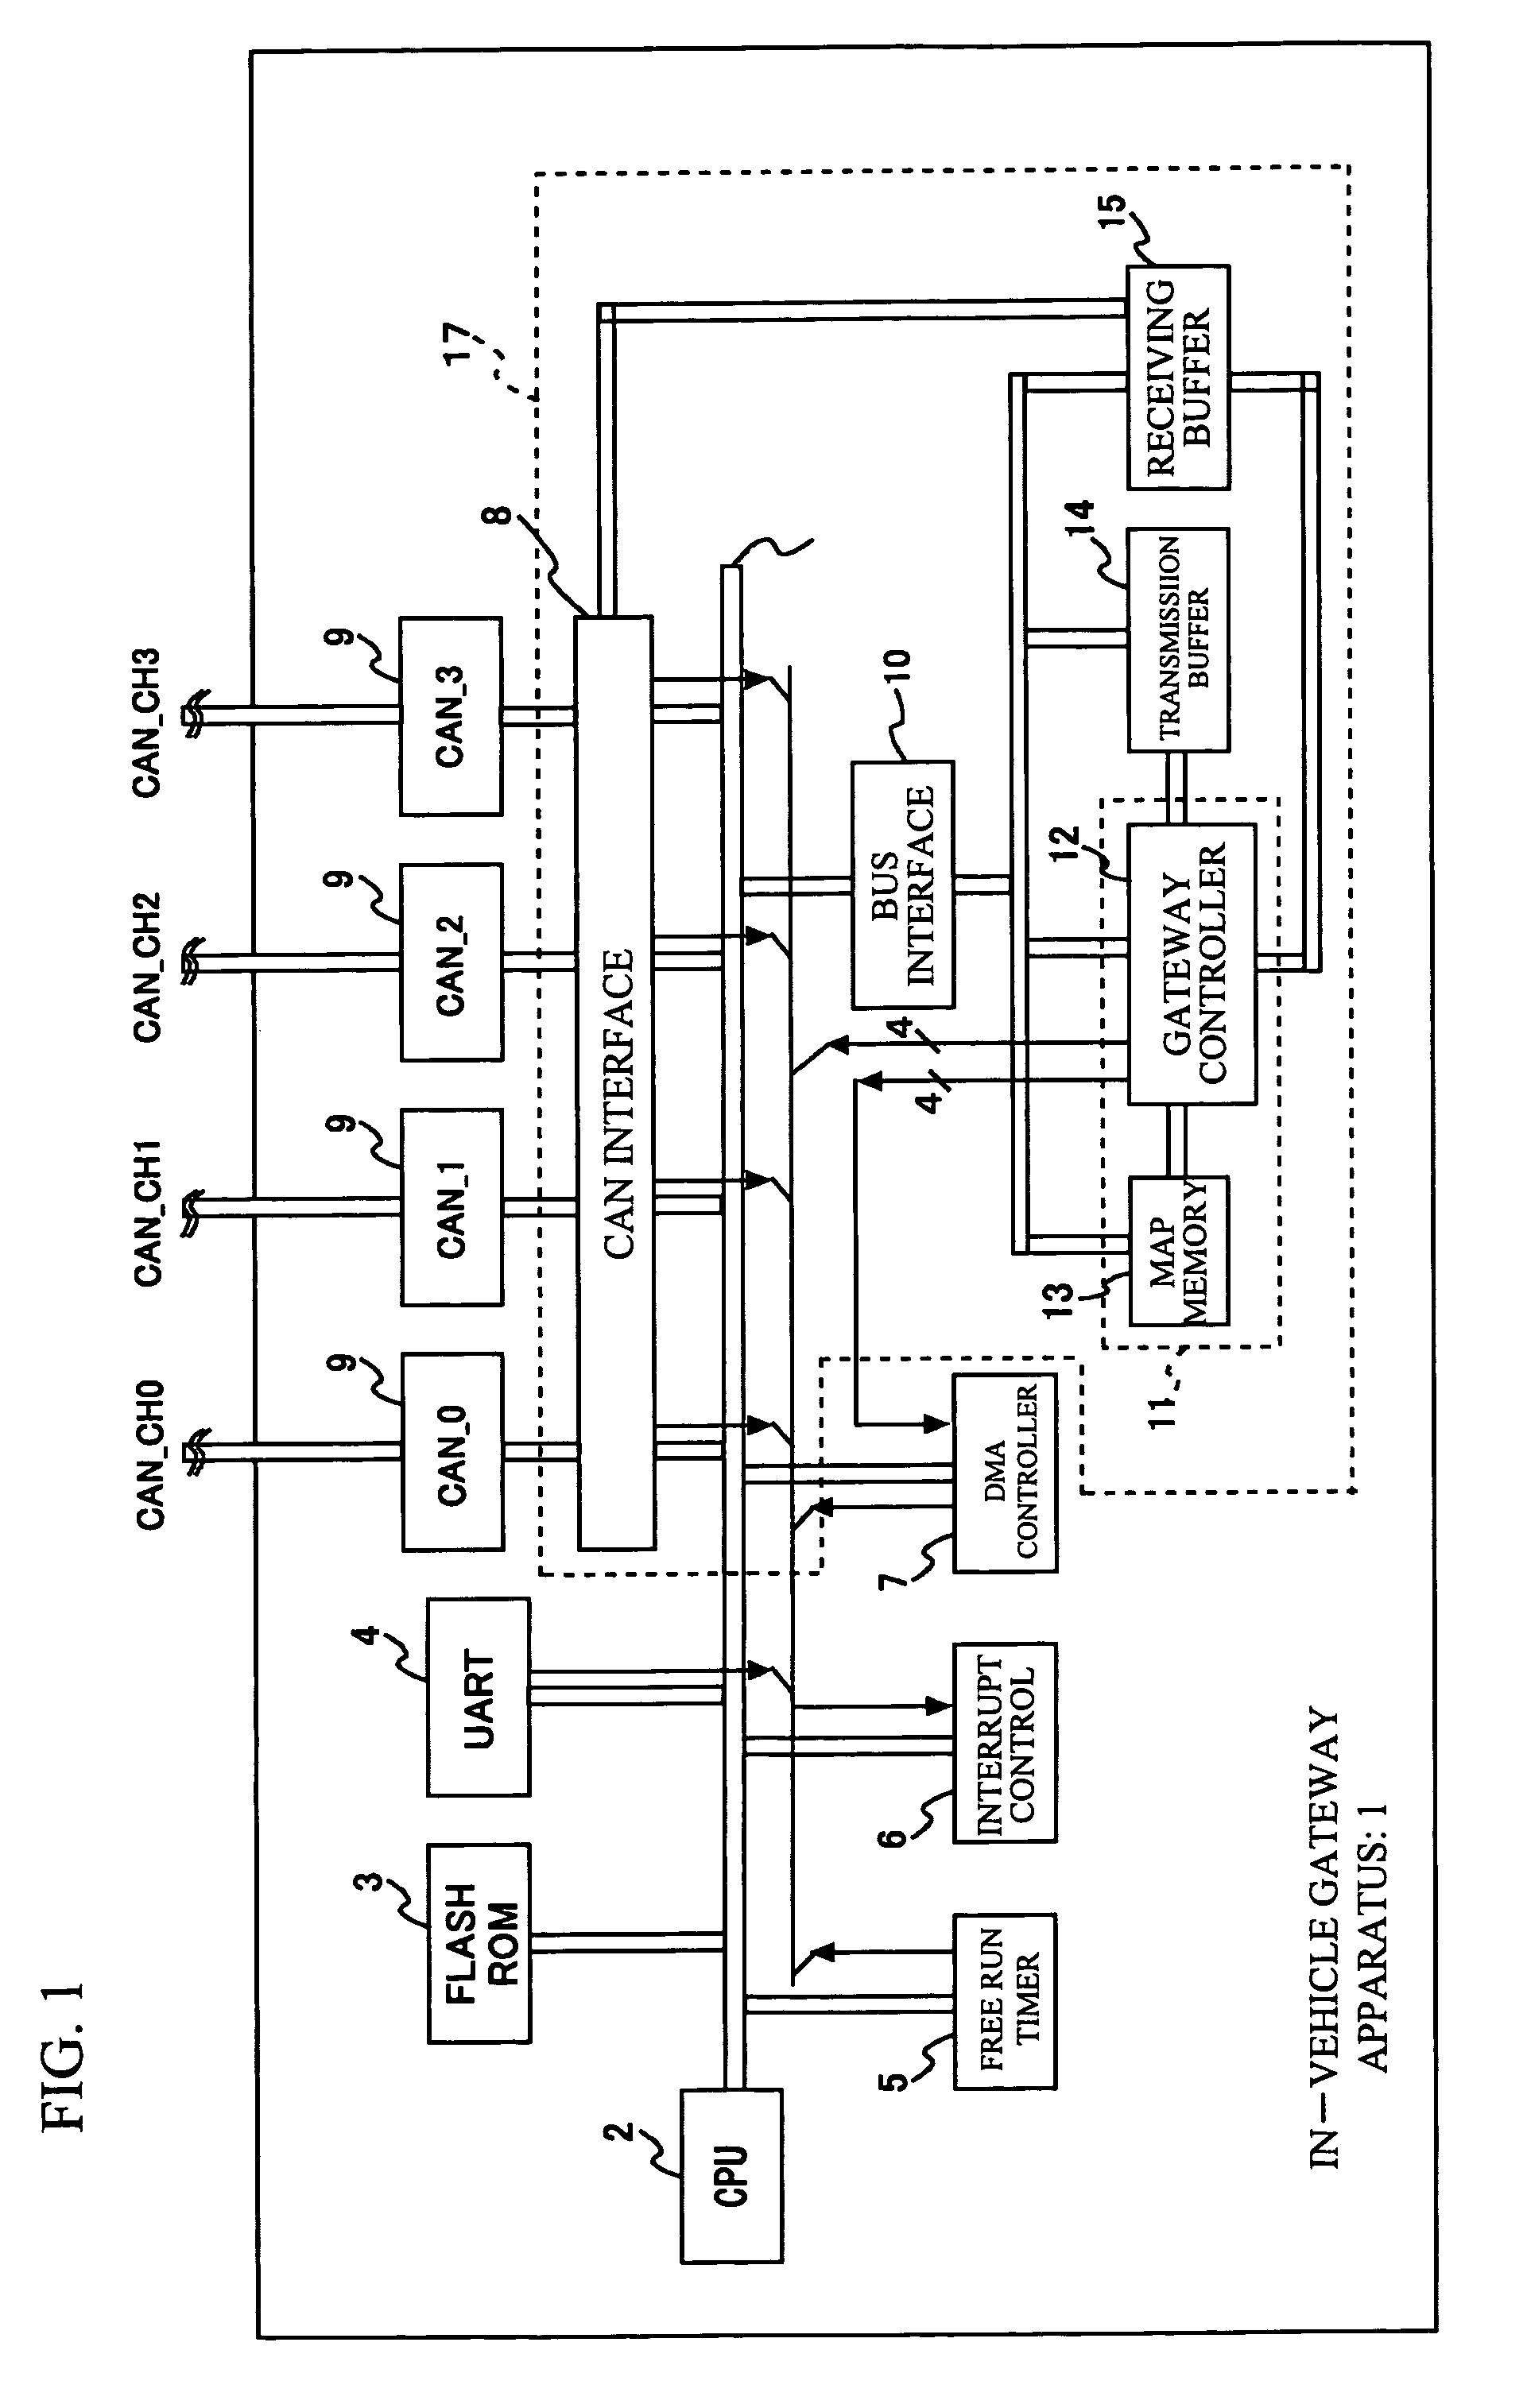 Gateway apparatus and routing method